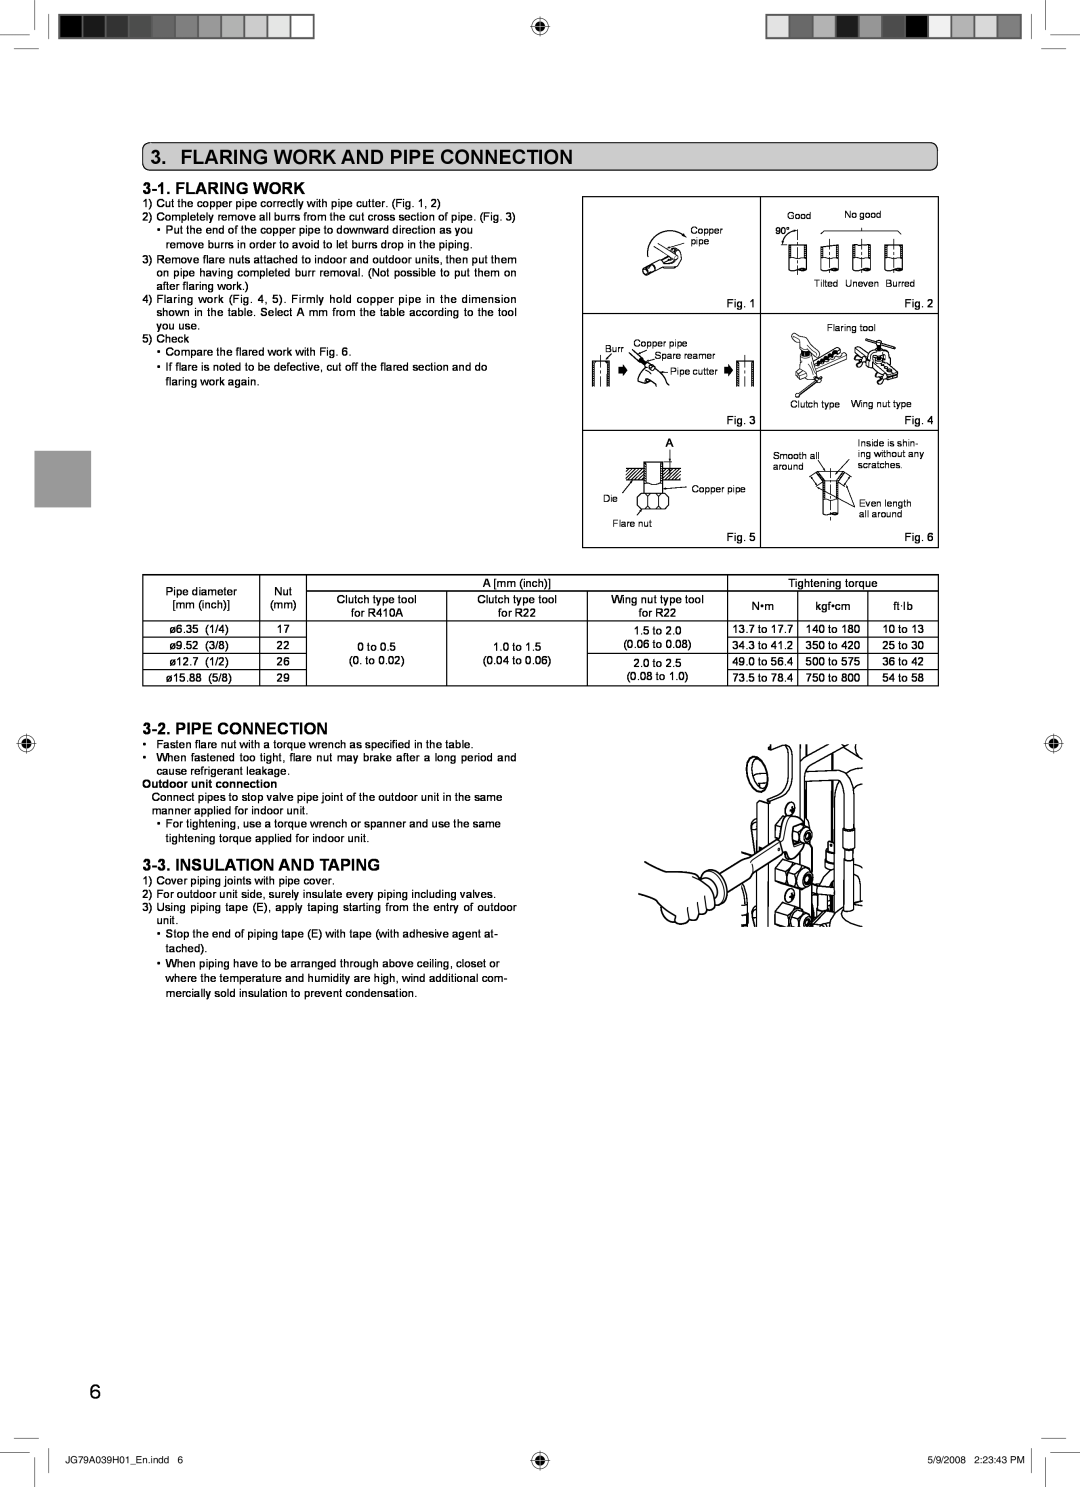 Mitsubishi Electronics MXZ-2A20NA installation manual Flaring Work And Pipe Connection, Insulation And Taping 